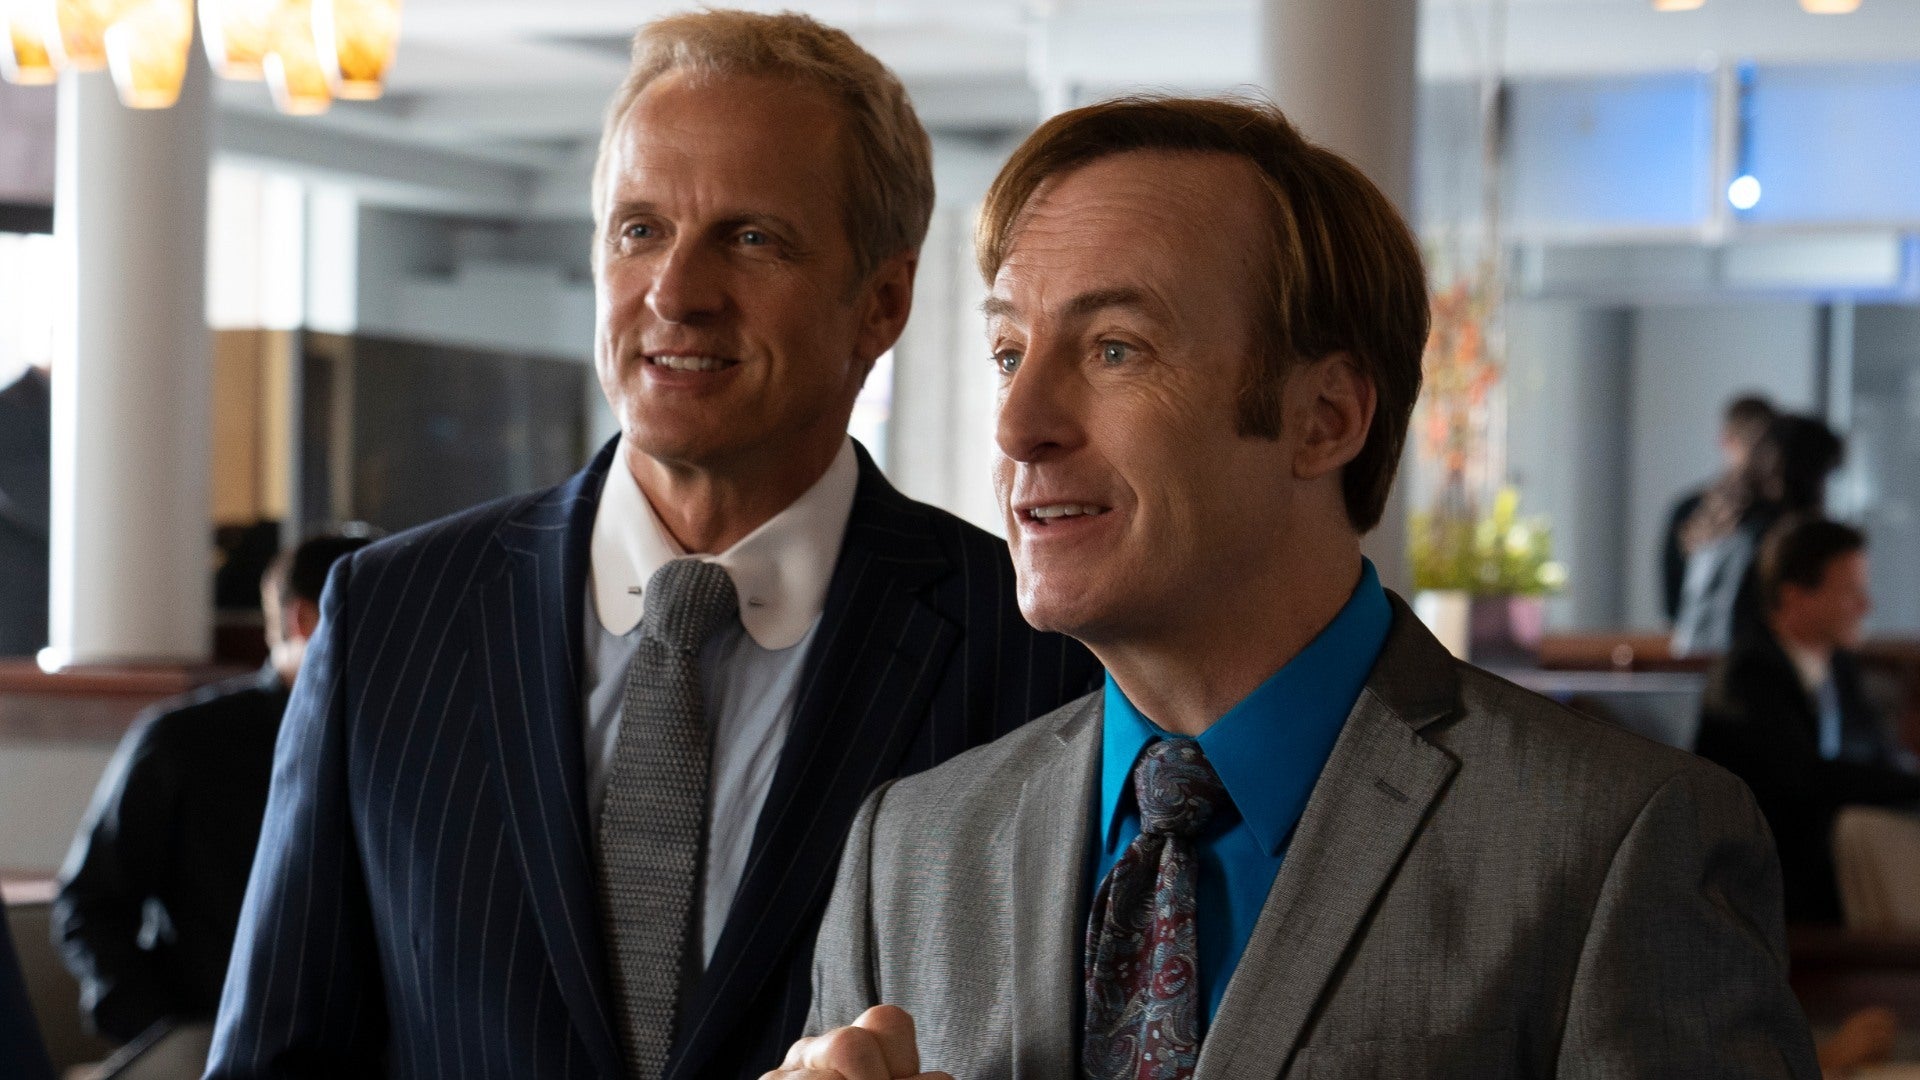 Better Call Saul – one of the best Netflix shows